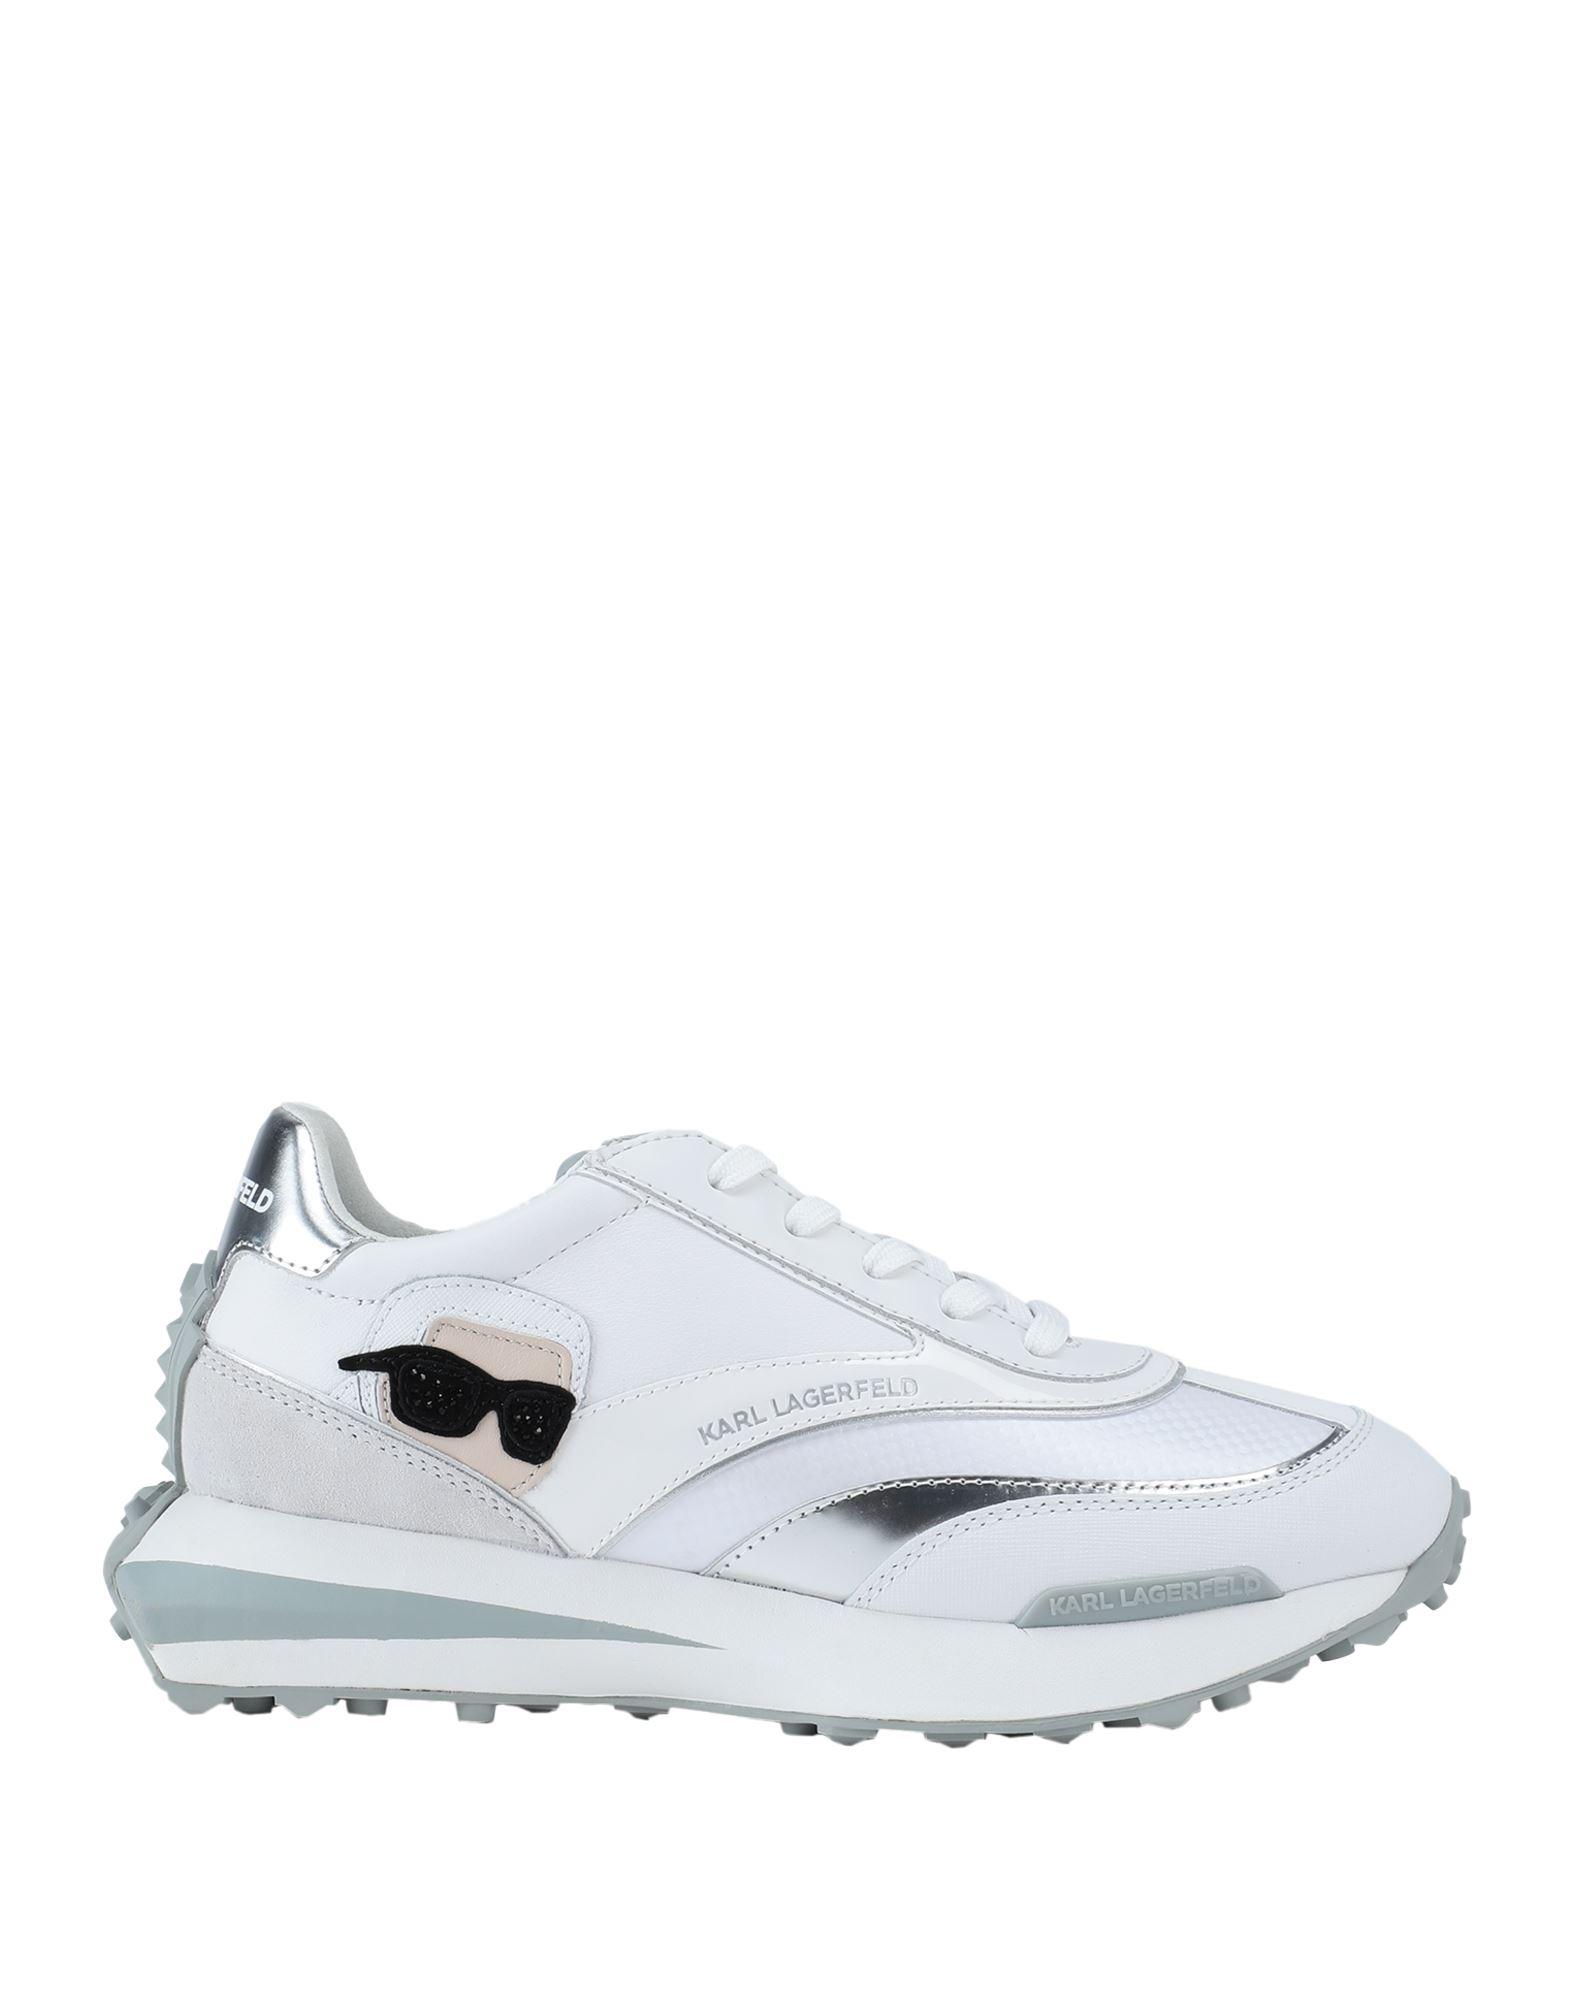 Karl Lagerfeld Trainers in White | Lyst